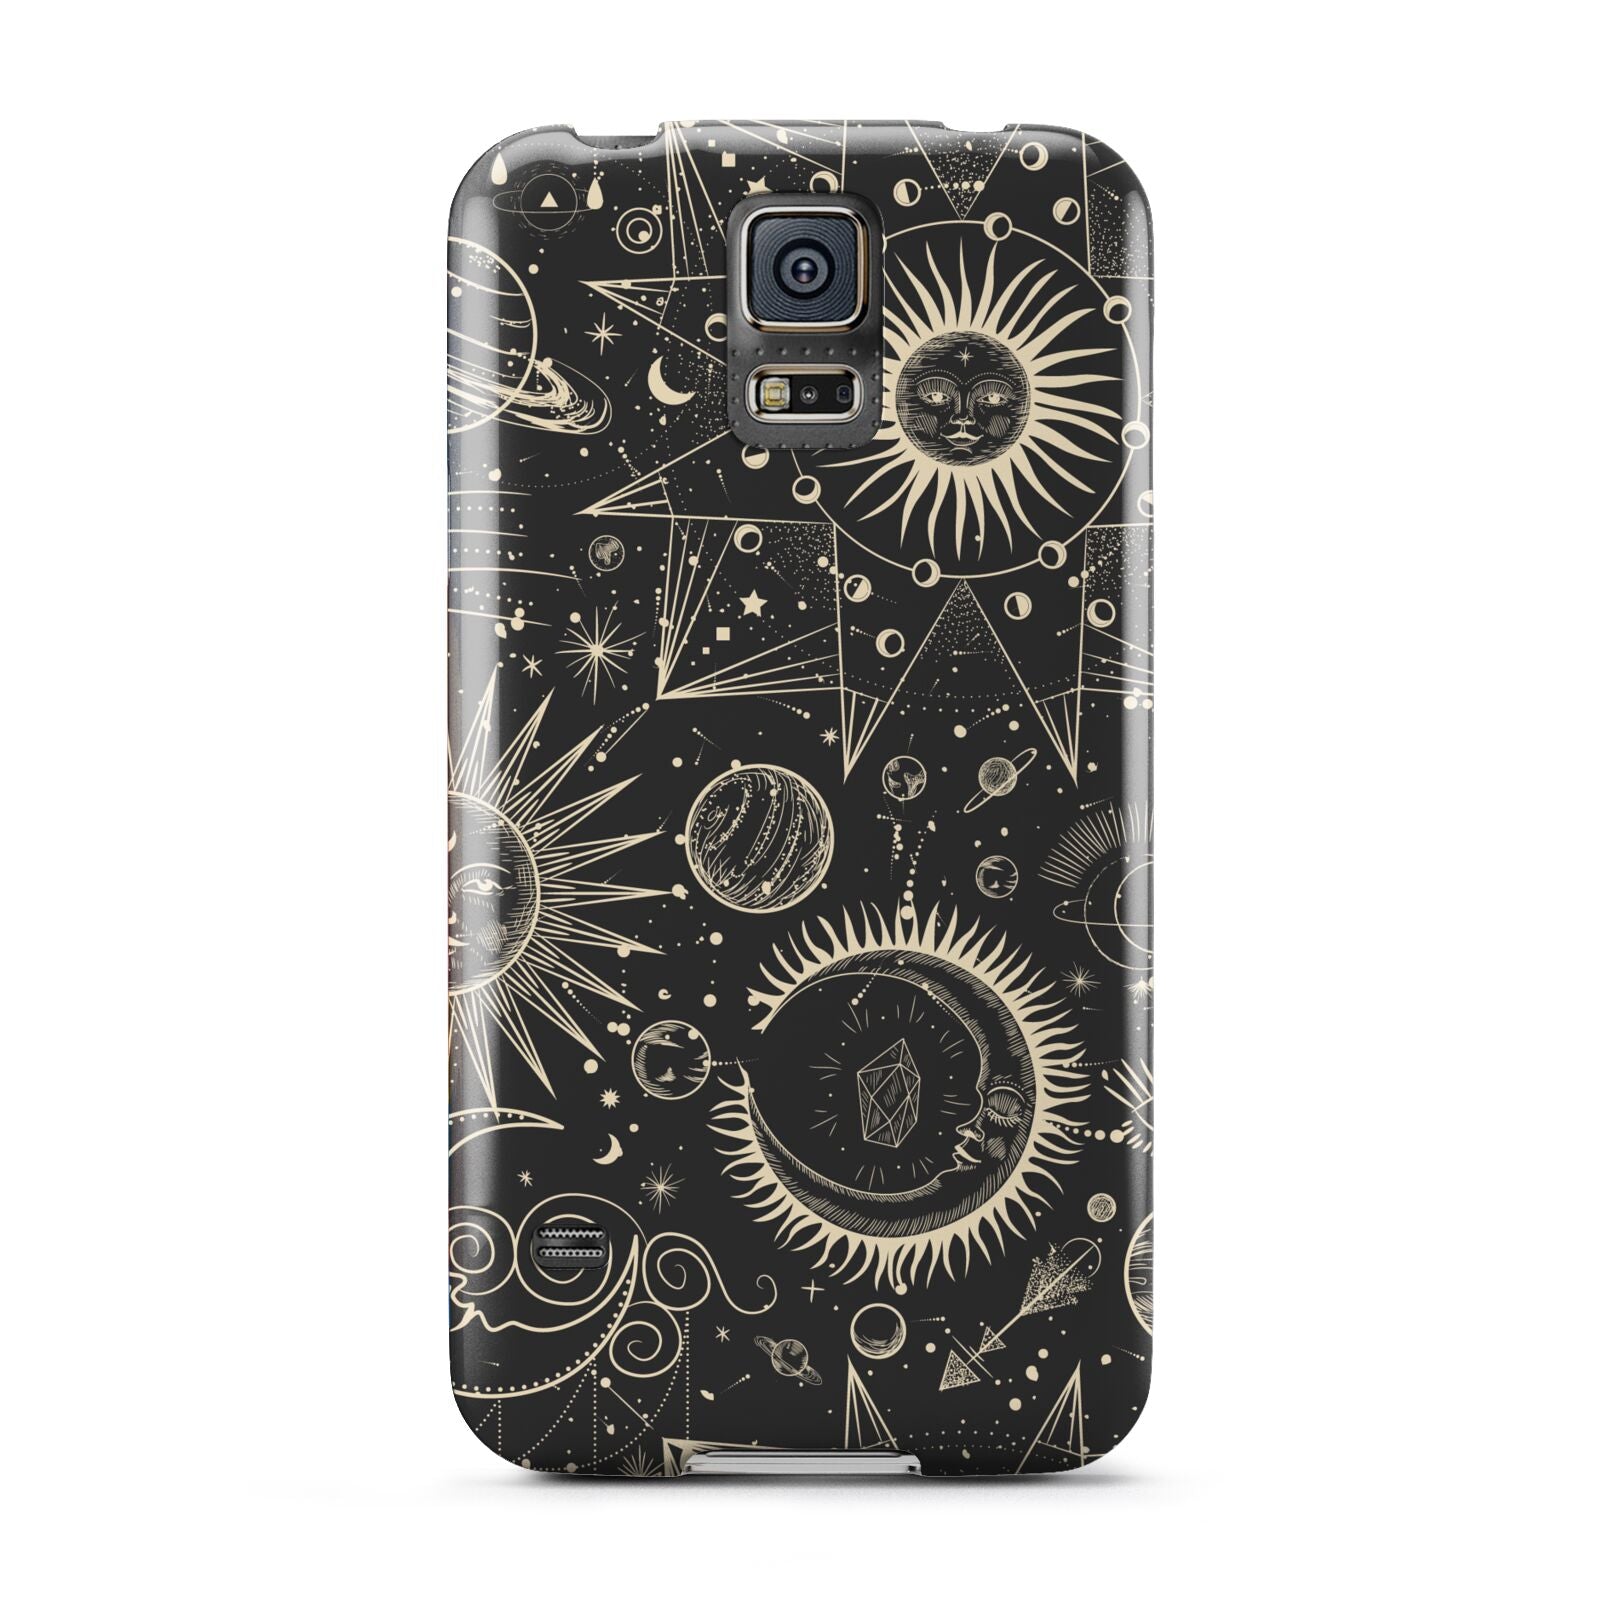 Moon Phases Samsung Galaxy S5 Case